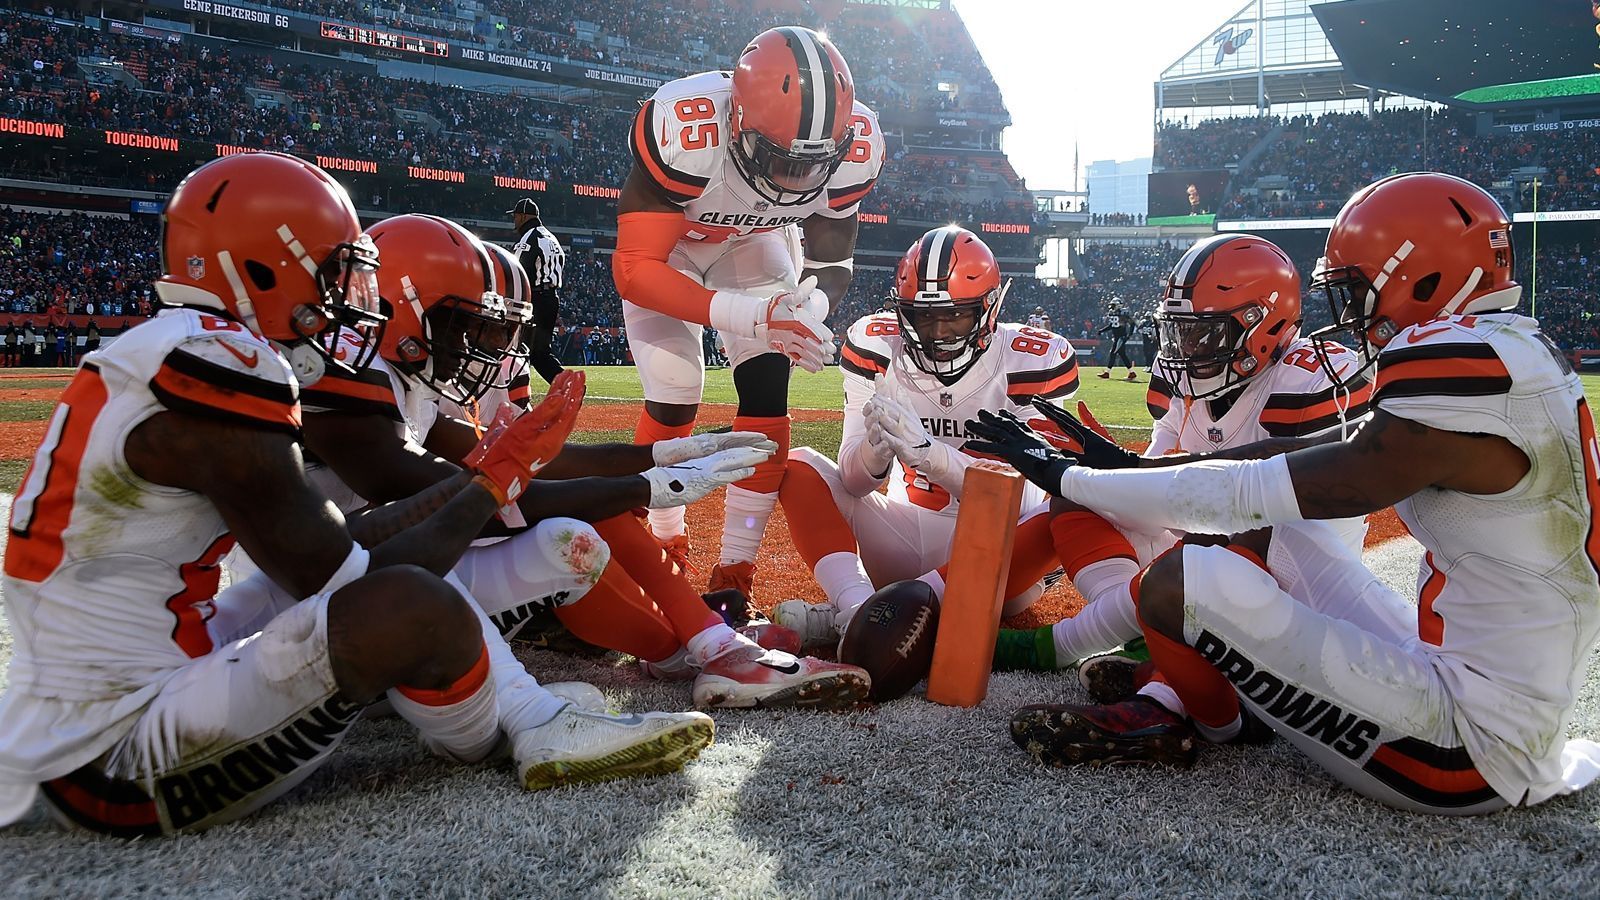 
                <strong>Platz 25: Cleveland Browns</strong><br>
                Pro-Bowl-Selections insgesamt: 35
              